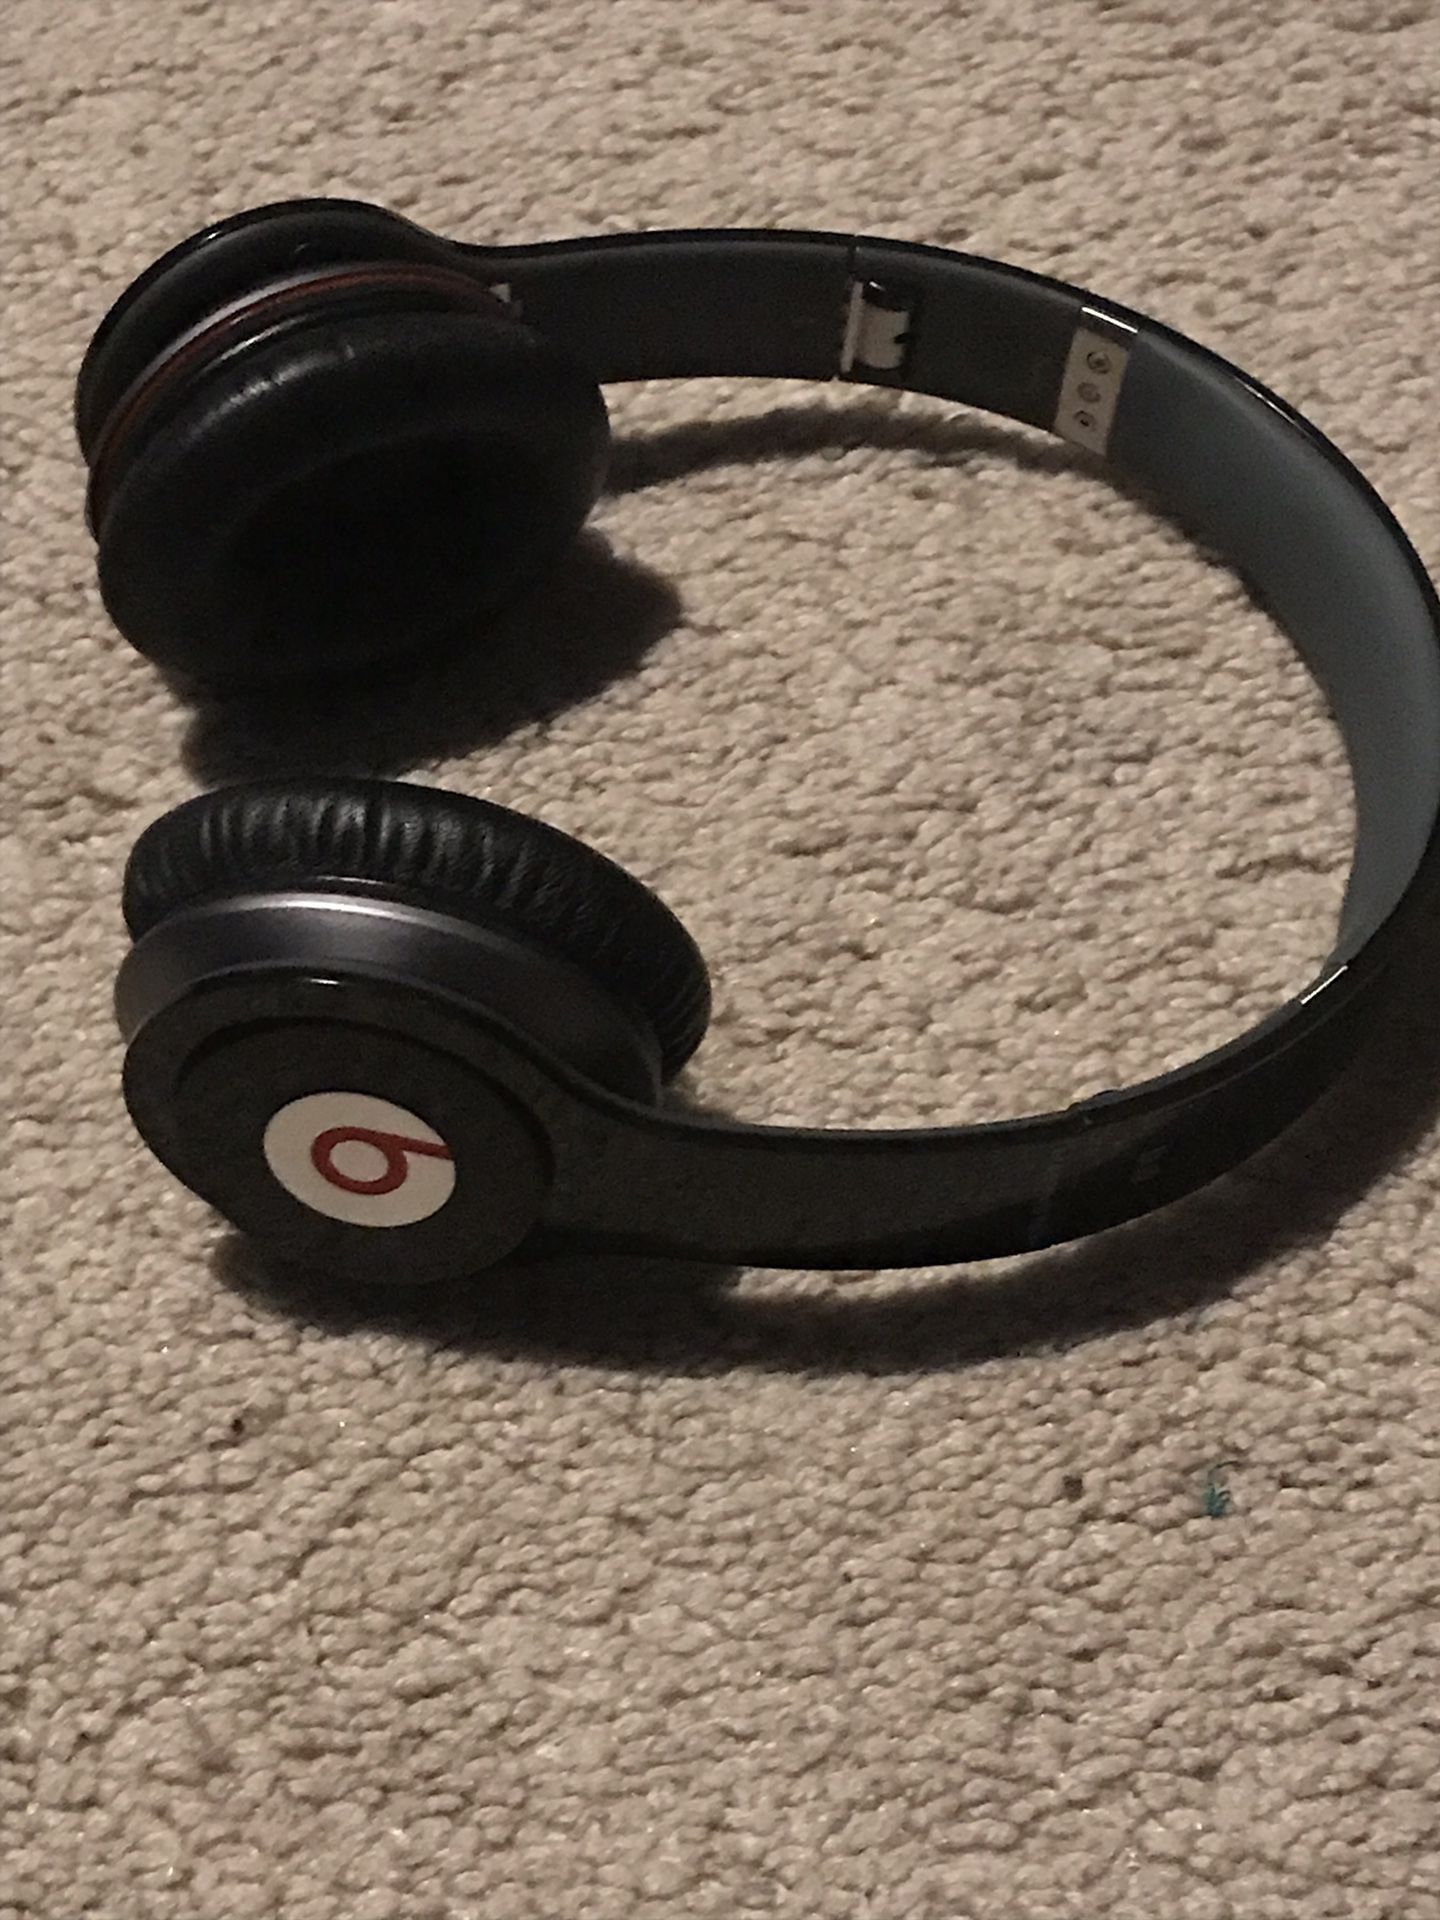 Beats By Dr Dre Solo Hd monster wired headphones